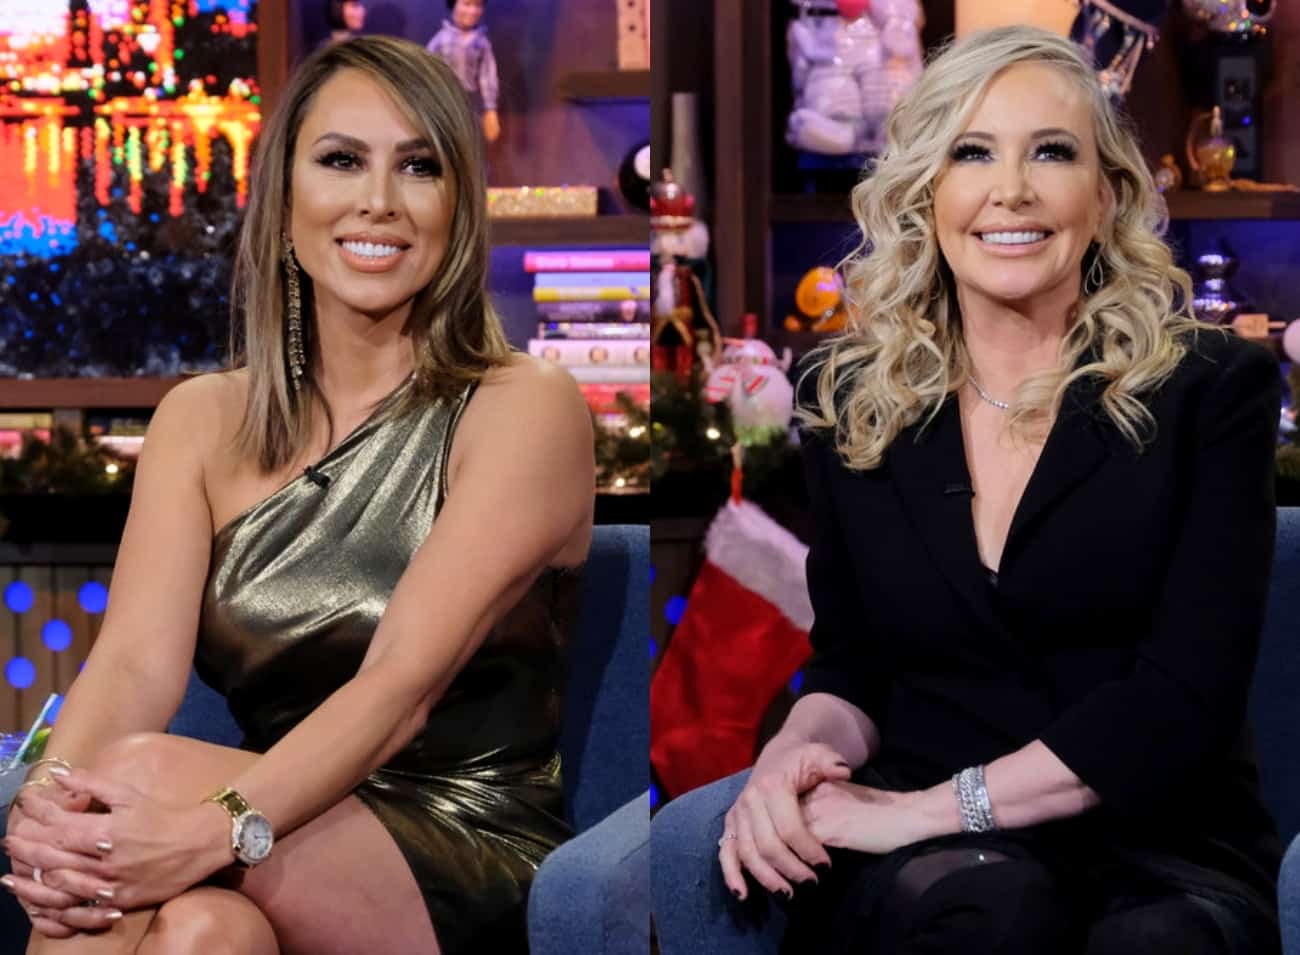 Kelly Dodd Claims Shannon Beador Has No Friends Left on the RHOC After Vicki and Tamra's Exits, Reveals if There's Hope for a Reconciliation Between Them